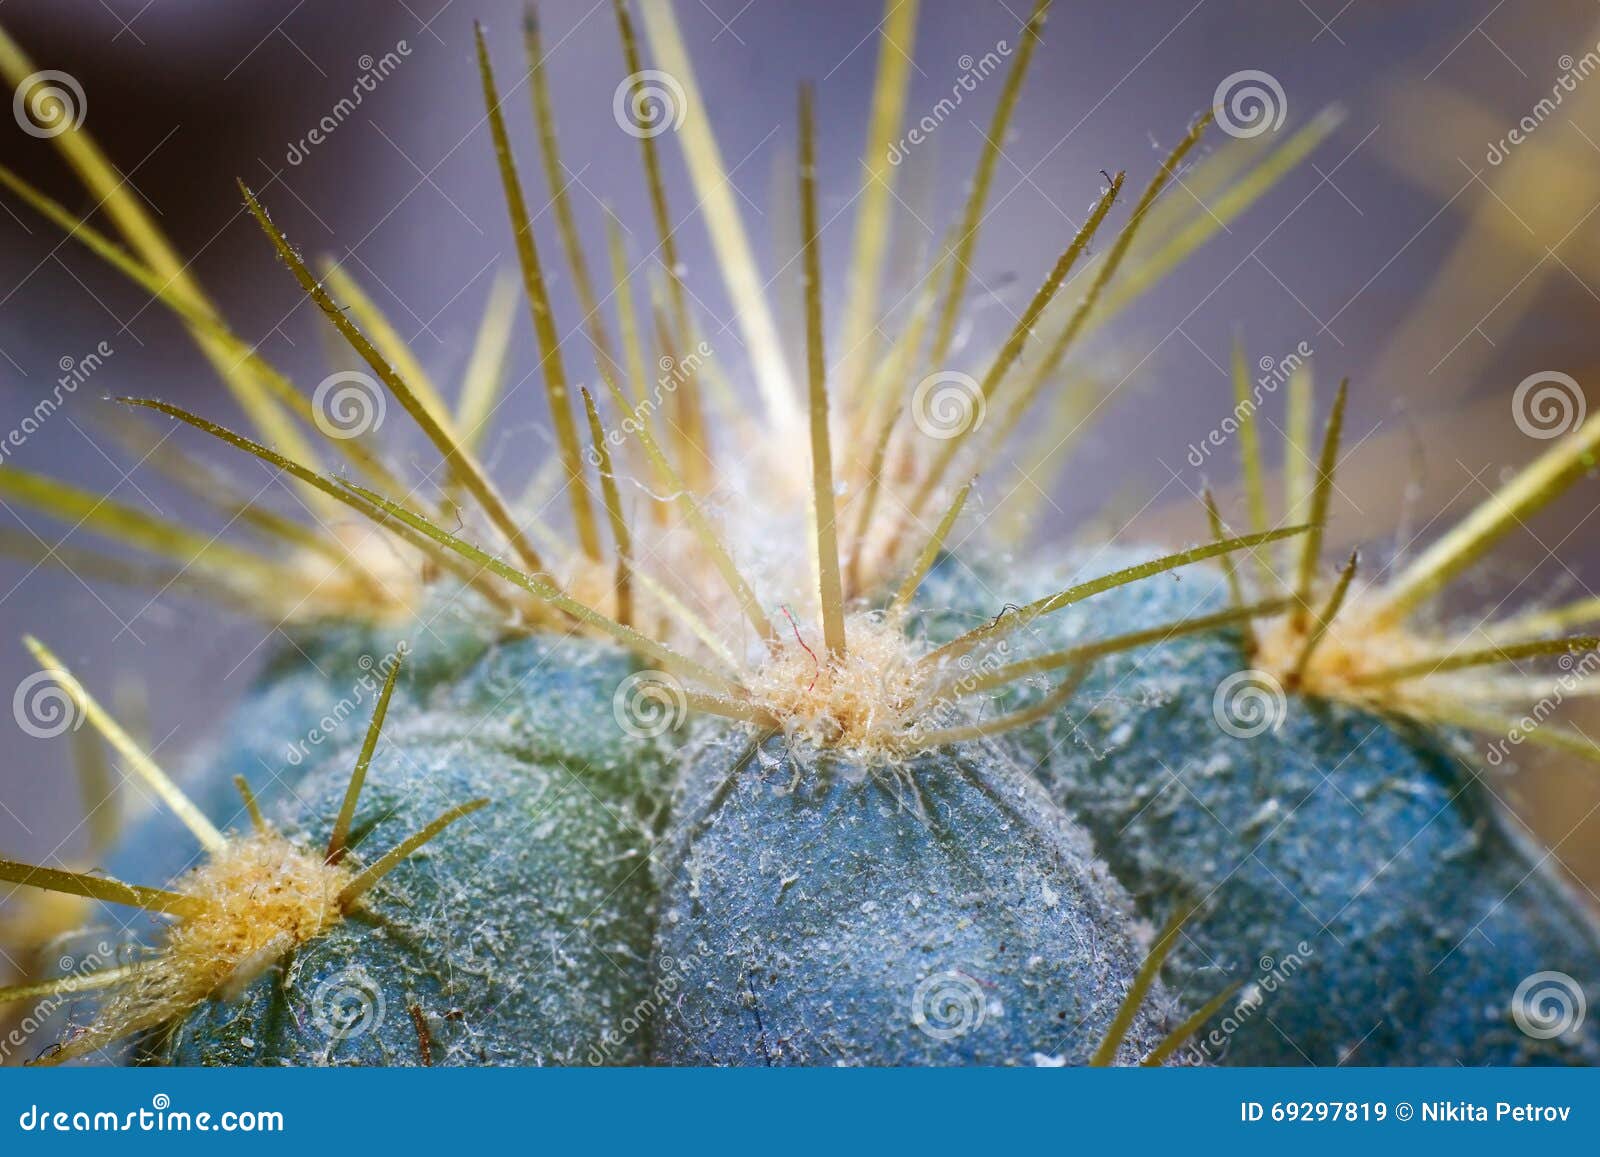 Macro Shot Of A Cactus Stock Image Image Of Spine Spines 69297819